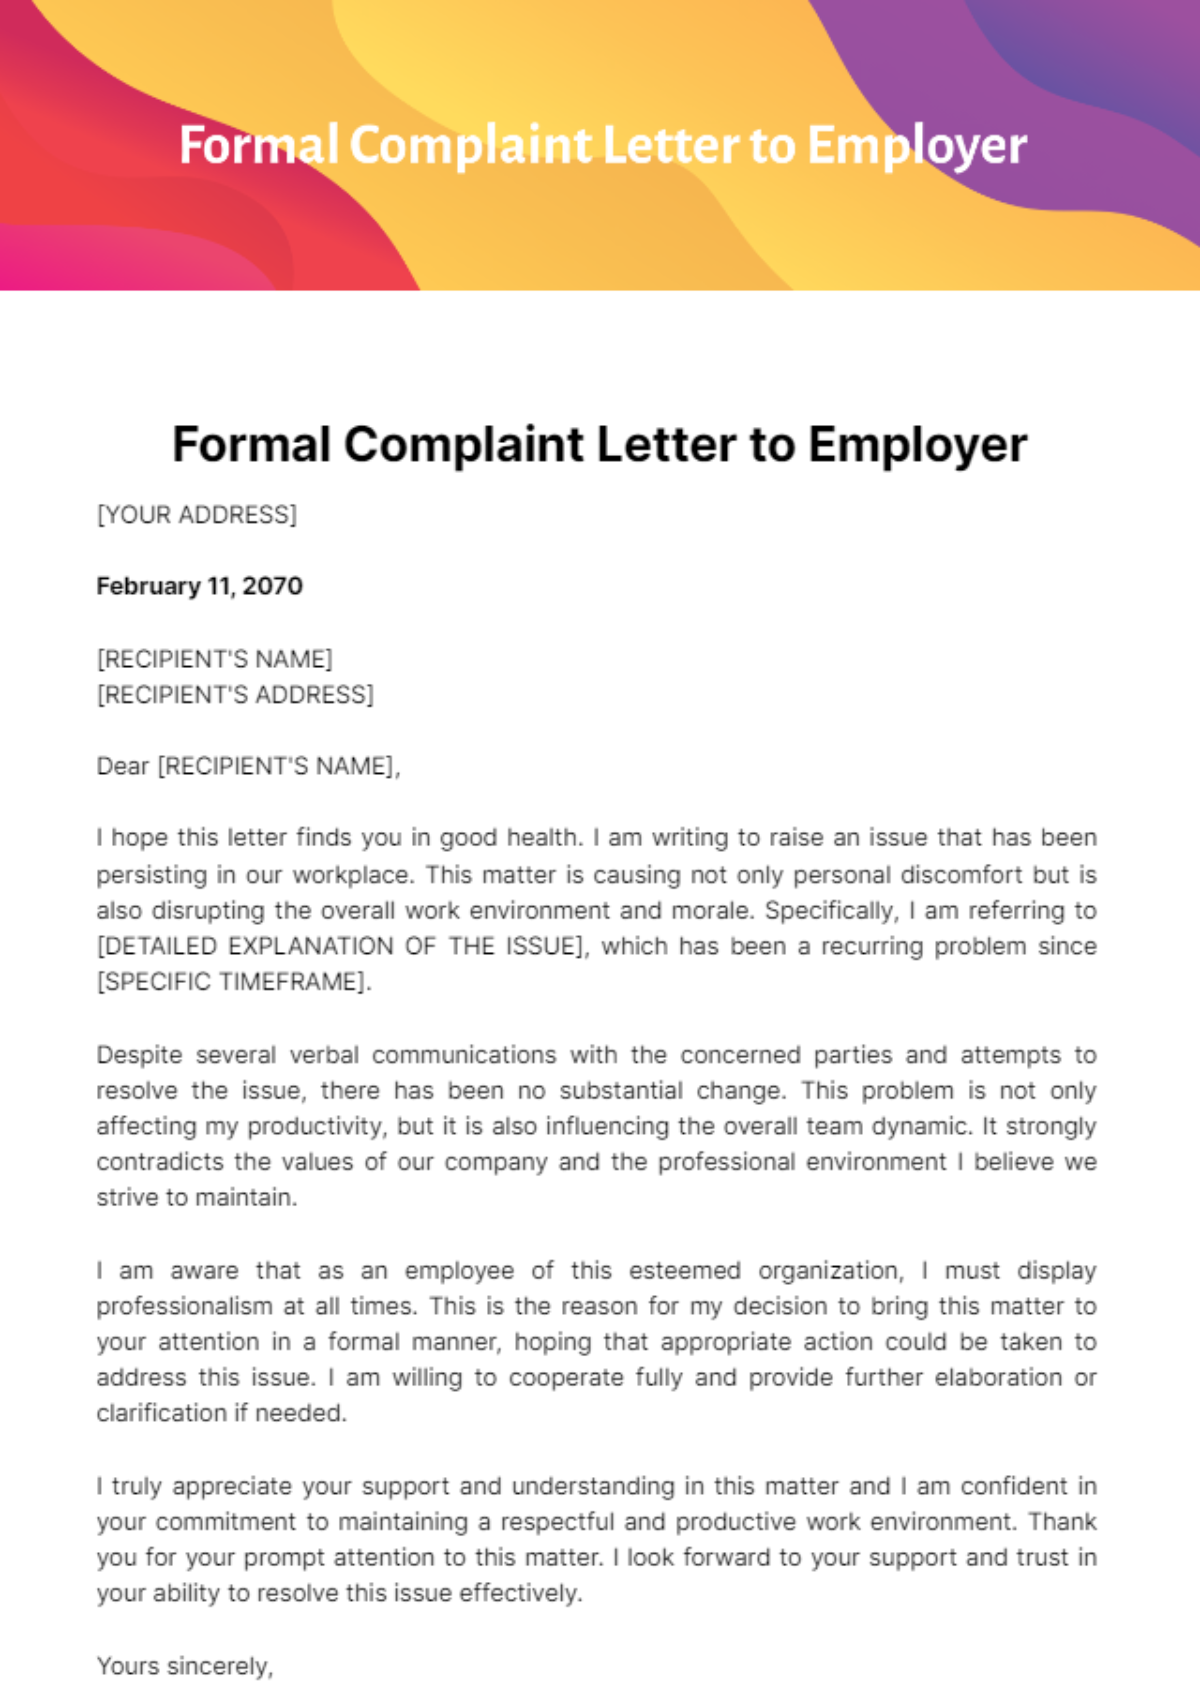 Free Formal Complaint Letter to Employer Template